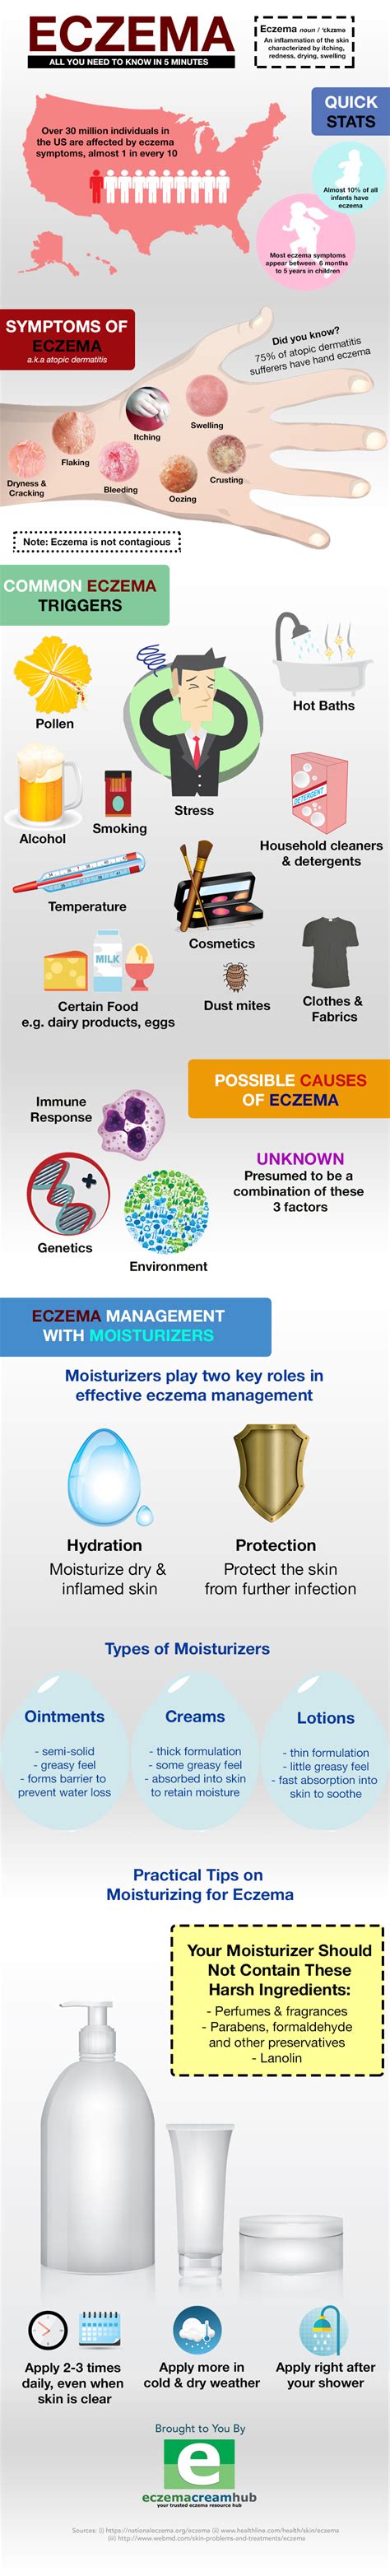 Eczema All You Need To Know In 5 Minutes Infographic